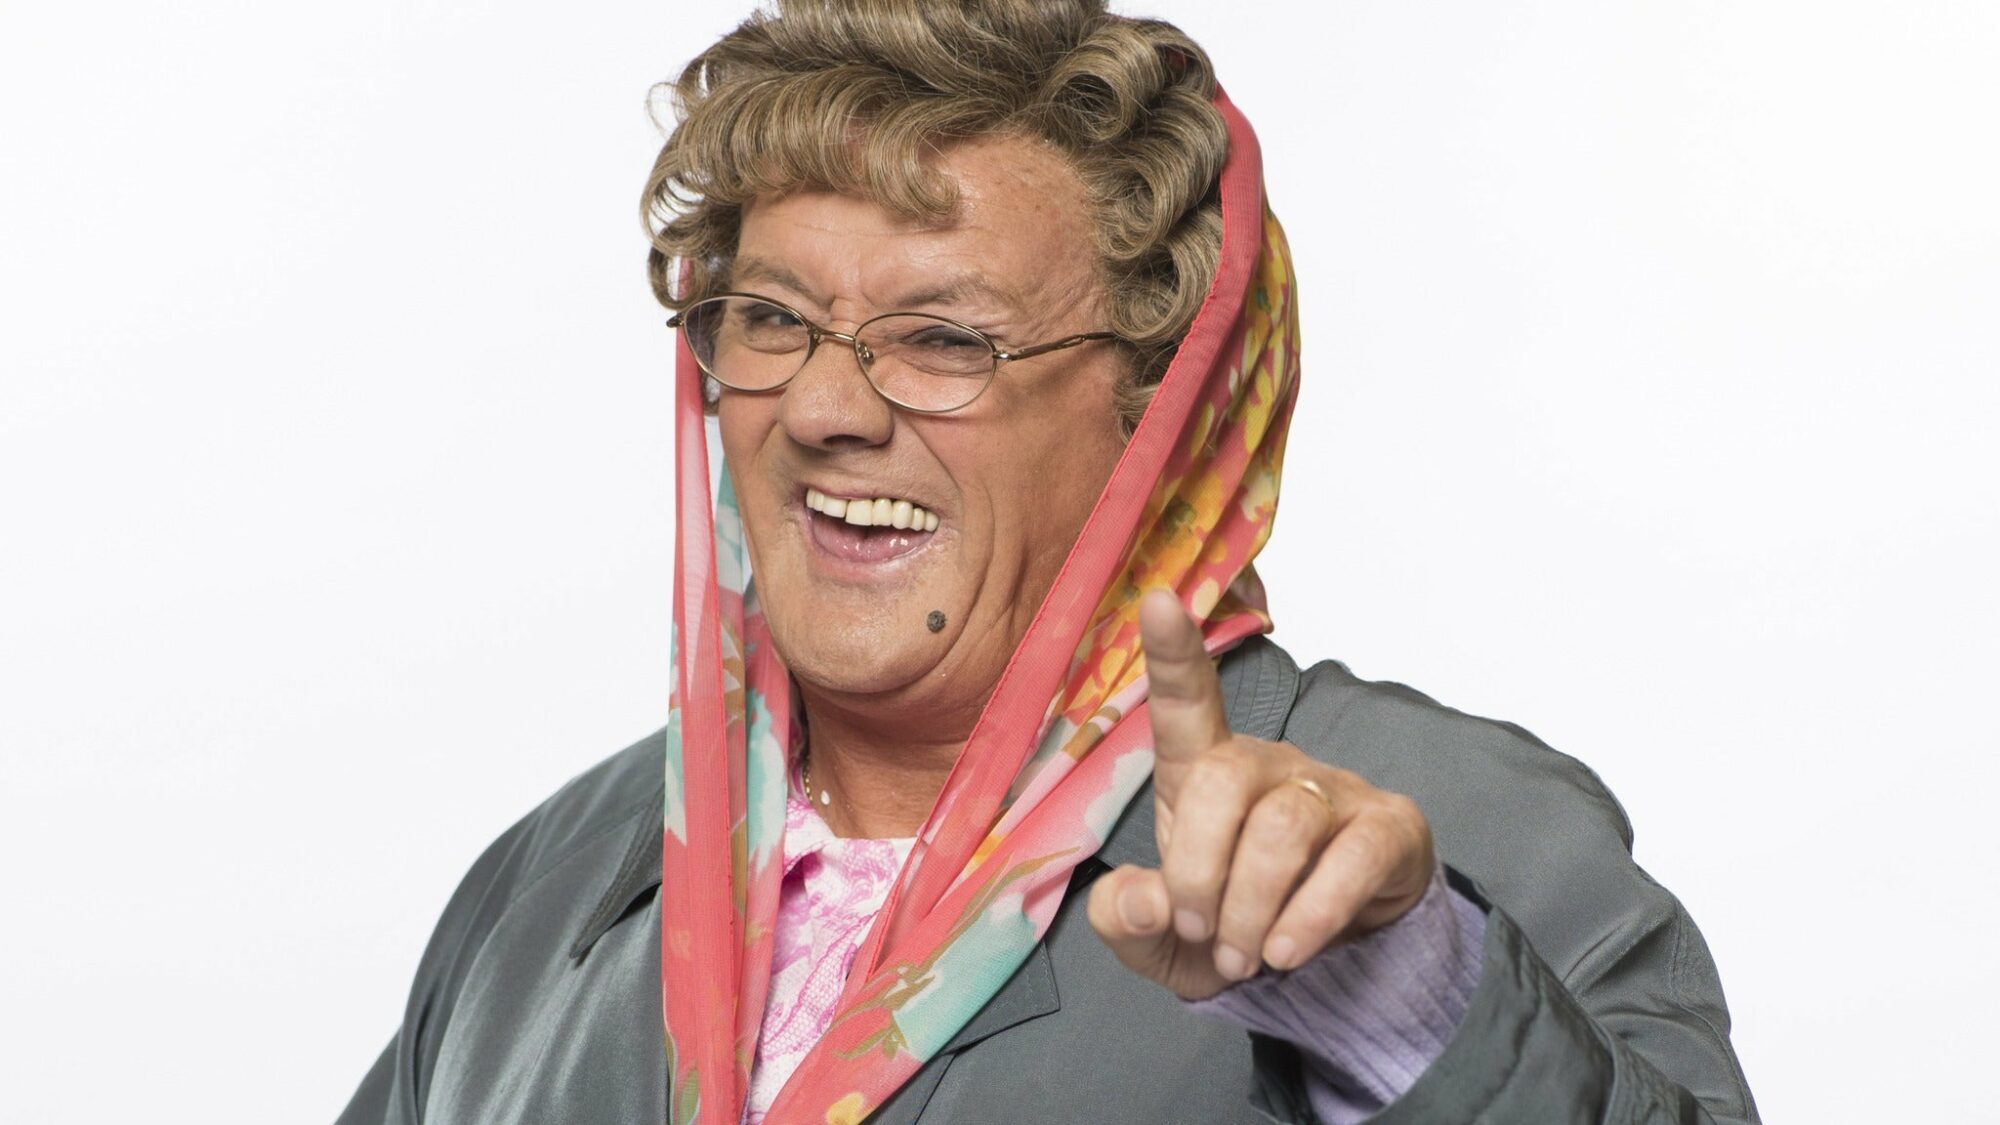 Image name Mrs Browns Boys Mrs Brown Rides Again at Bonus Arena Hull Hull the 18 image from the post Mrs Brown's Boys - Mrs Brown Rides Again at Connexin Live, Hull in Yorkshire.com.